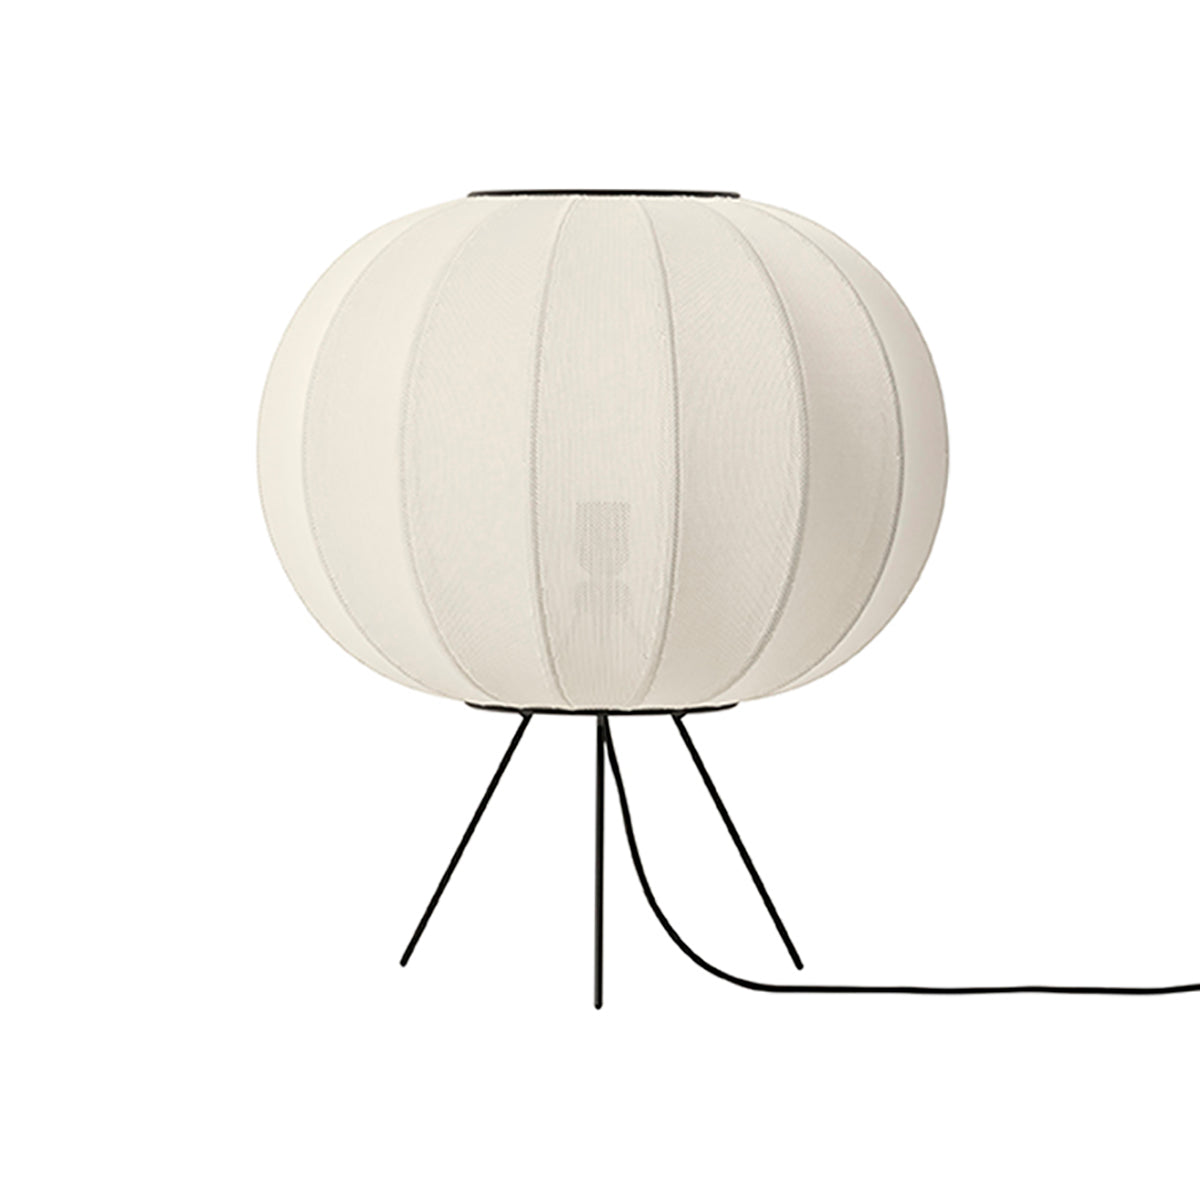 Knit-Wit Floor Lamp: Round 45 + Low + Pearl White